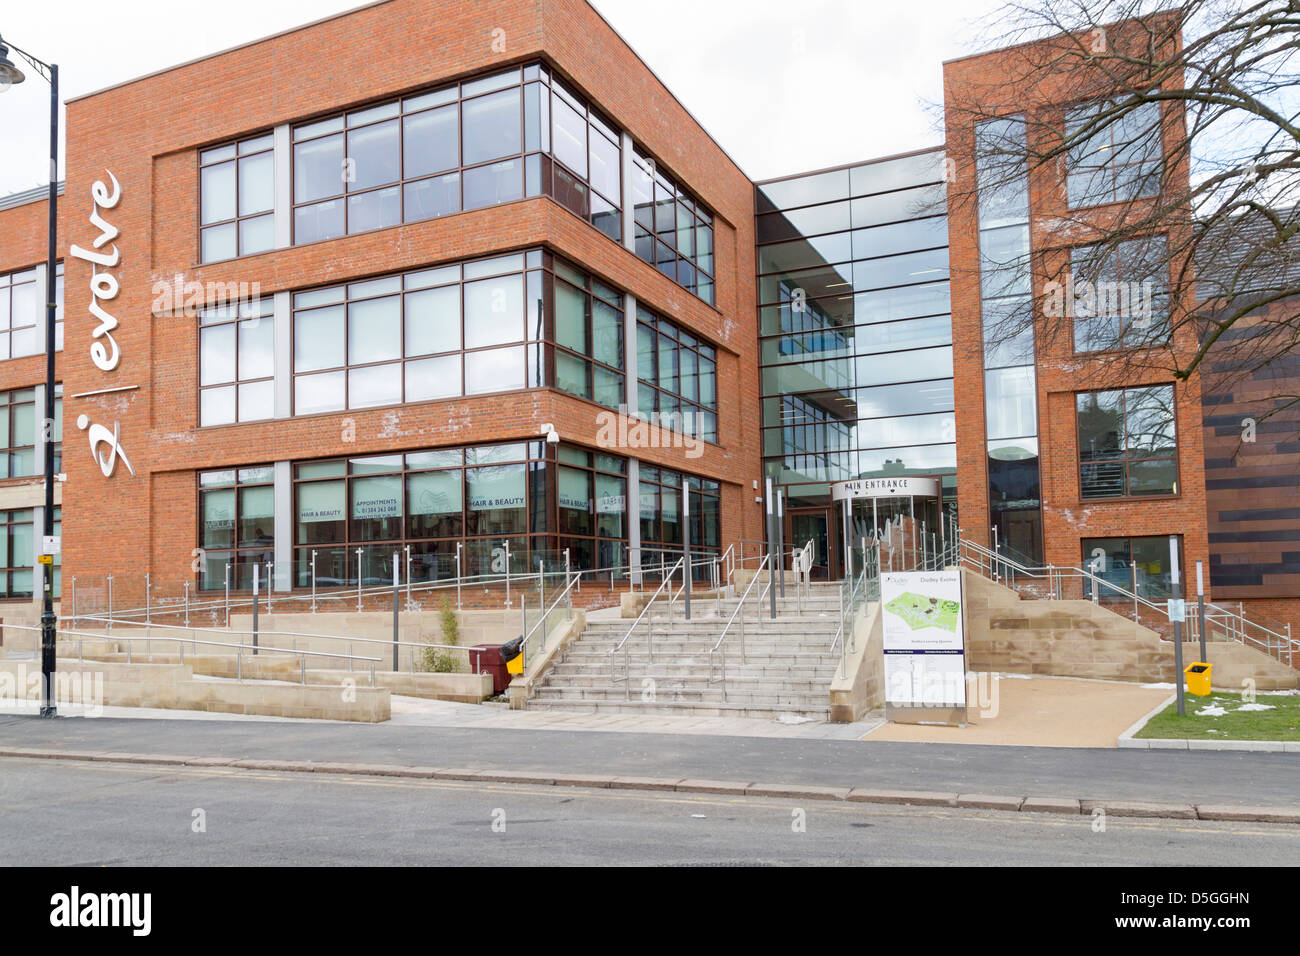 The new Dudley college building called Evolve Stock Photo